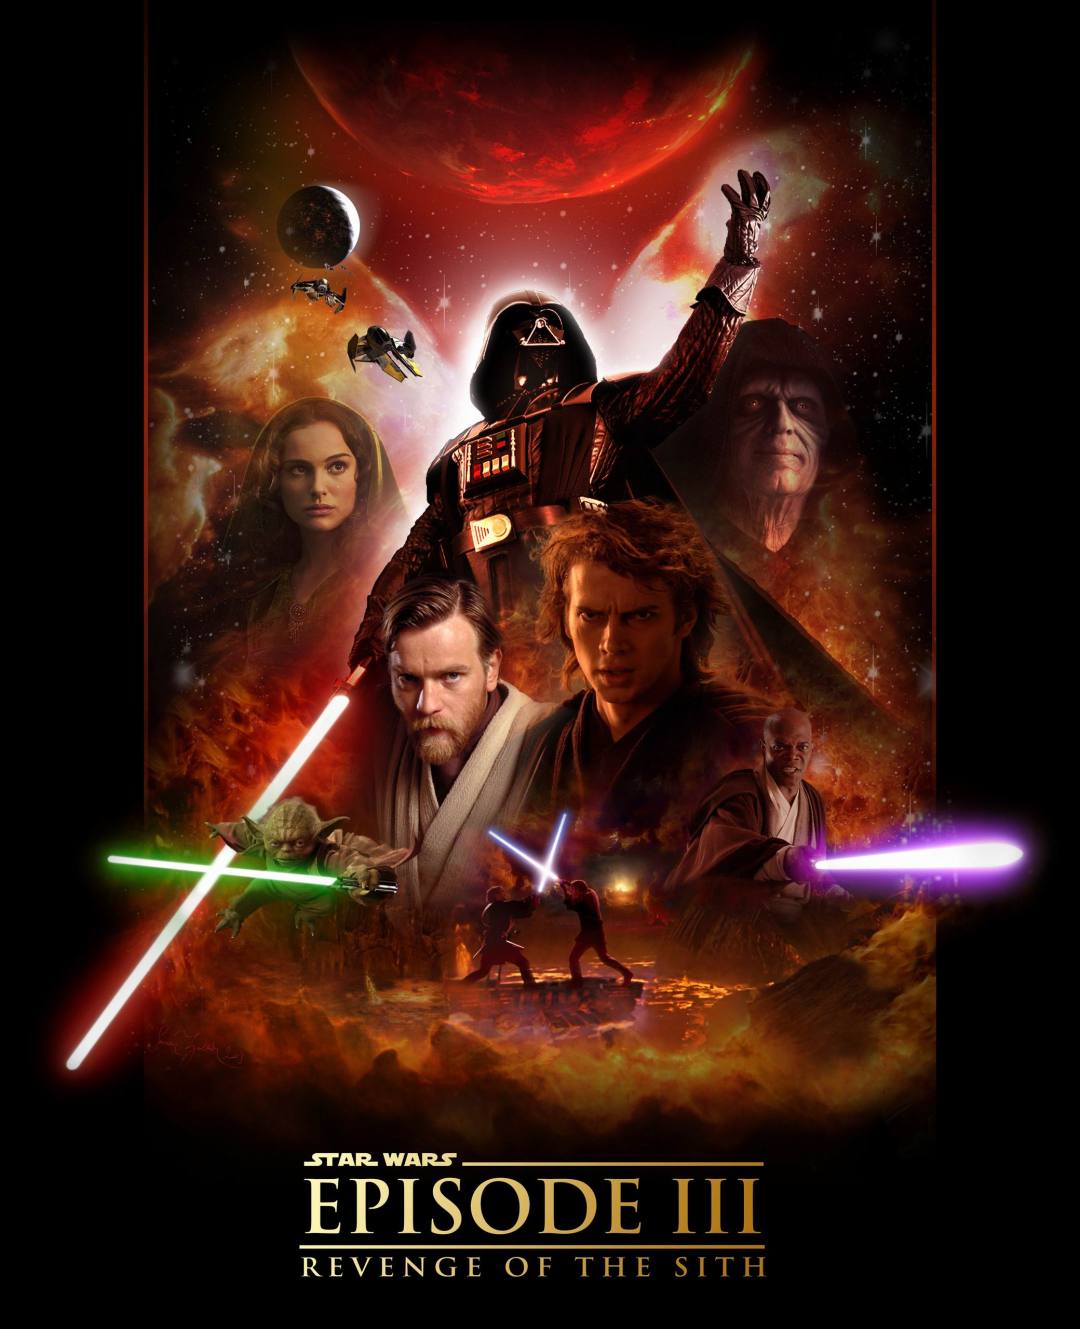 Movie Review Star Wars Episode III Revenge of the Sith Stroke of